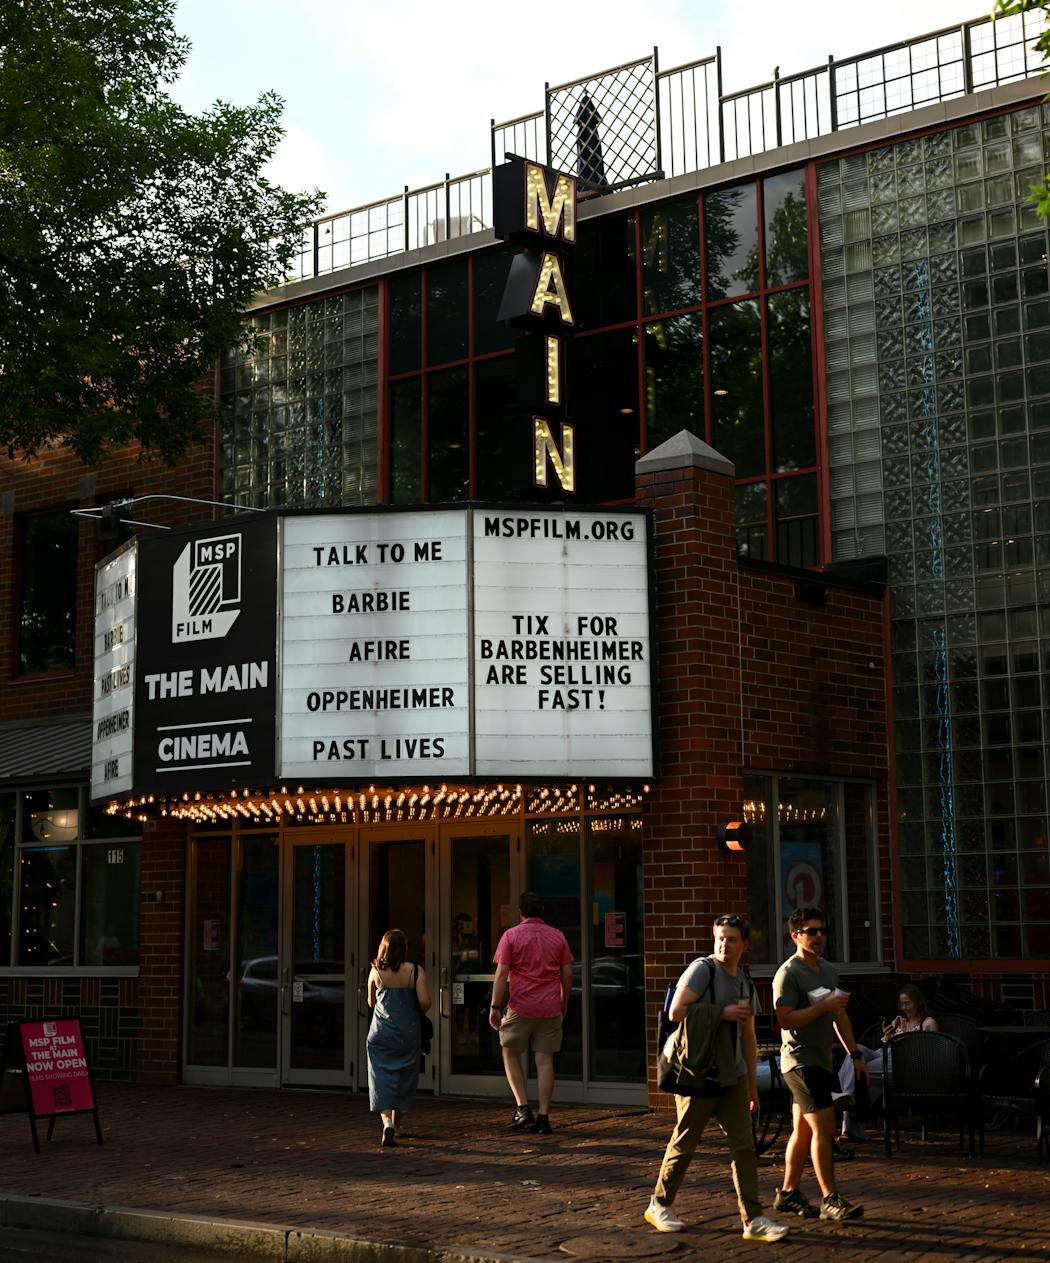 The Main Cinema is the site of several film series, including Cine Latino and Arab Film Fest, this fall.